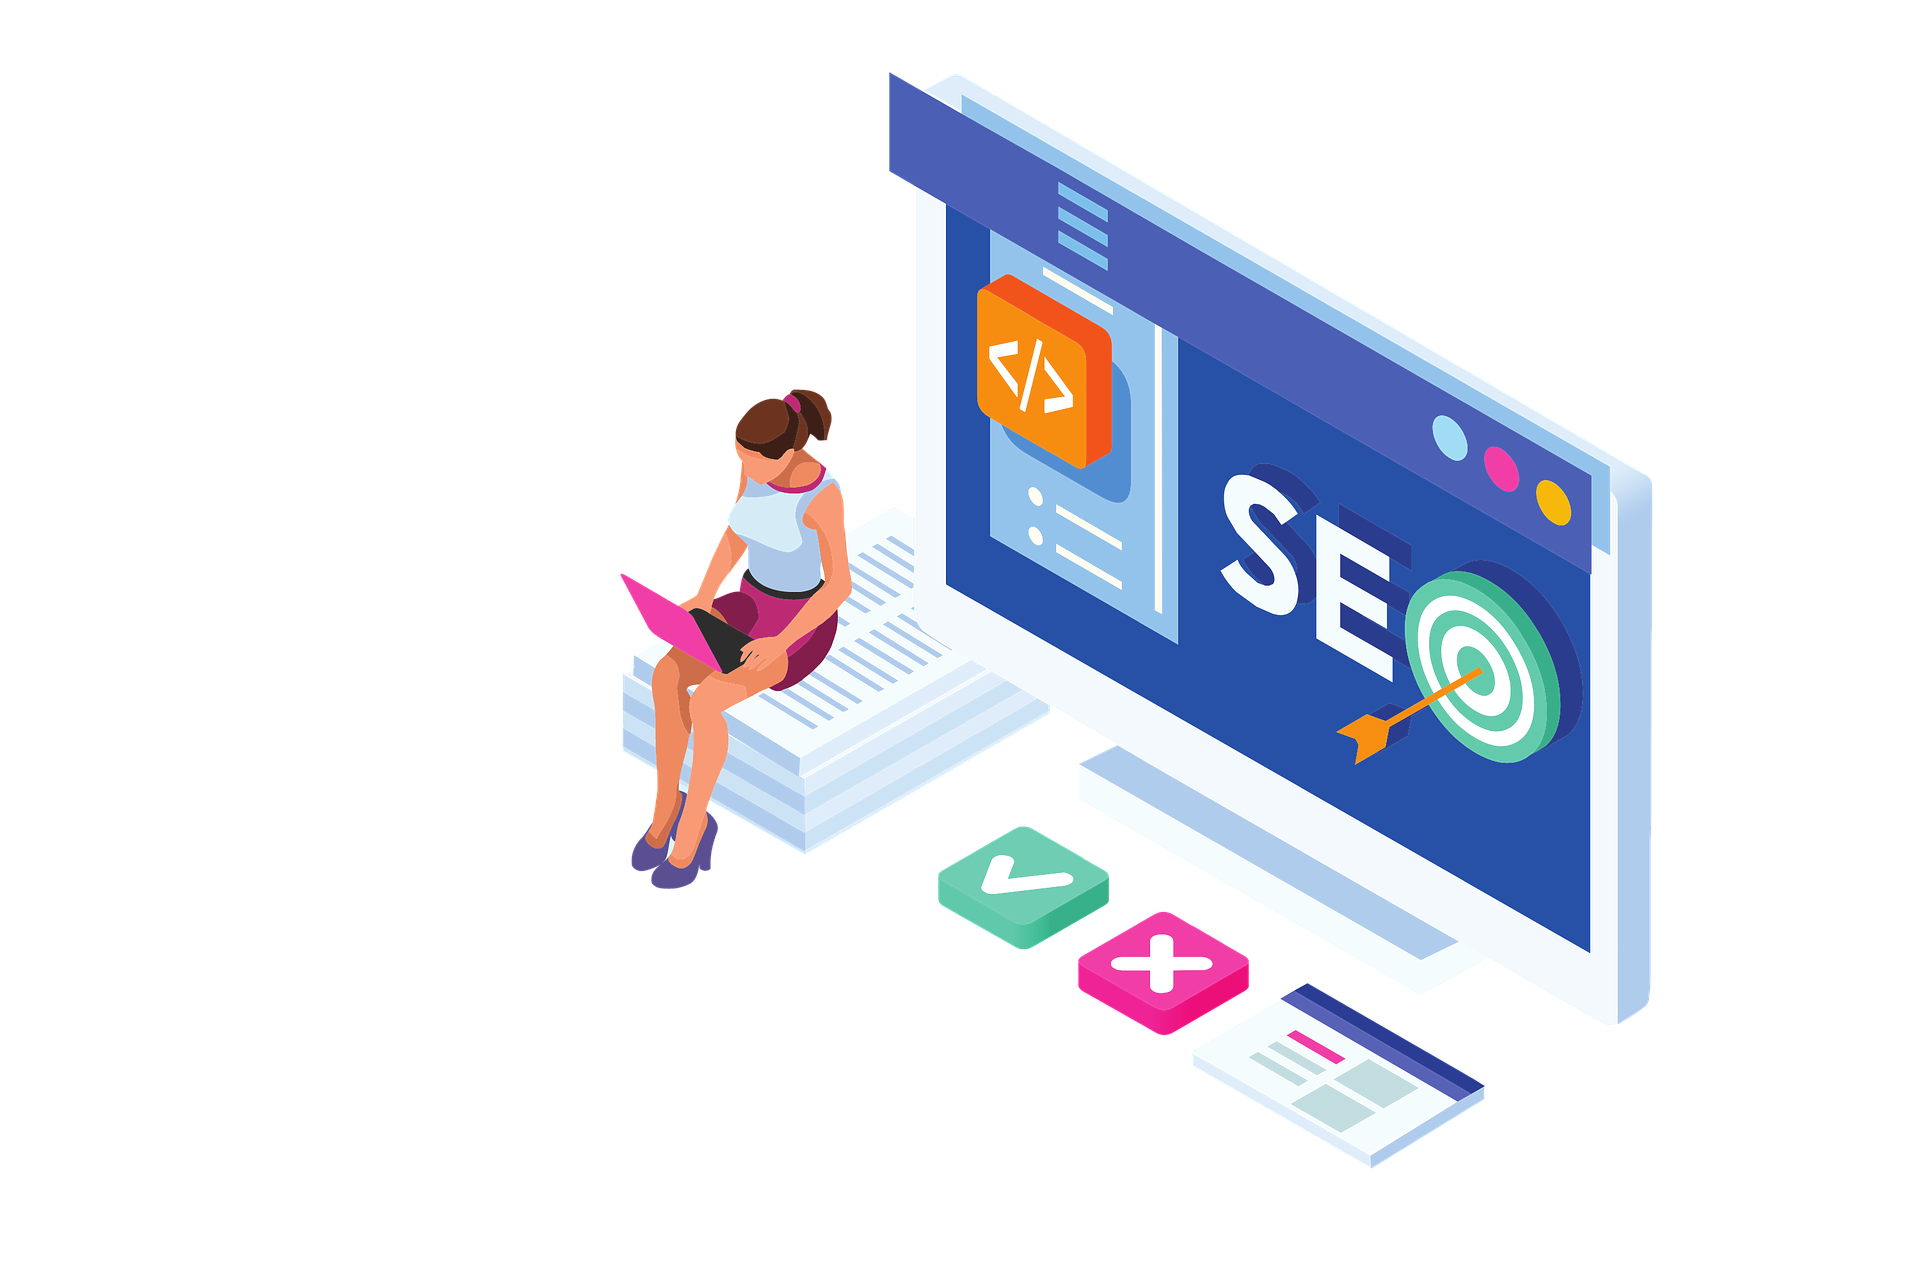 An illustration of a woman working on website SEO